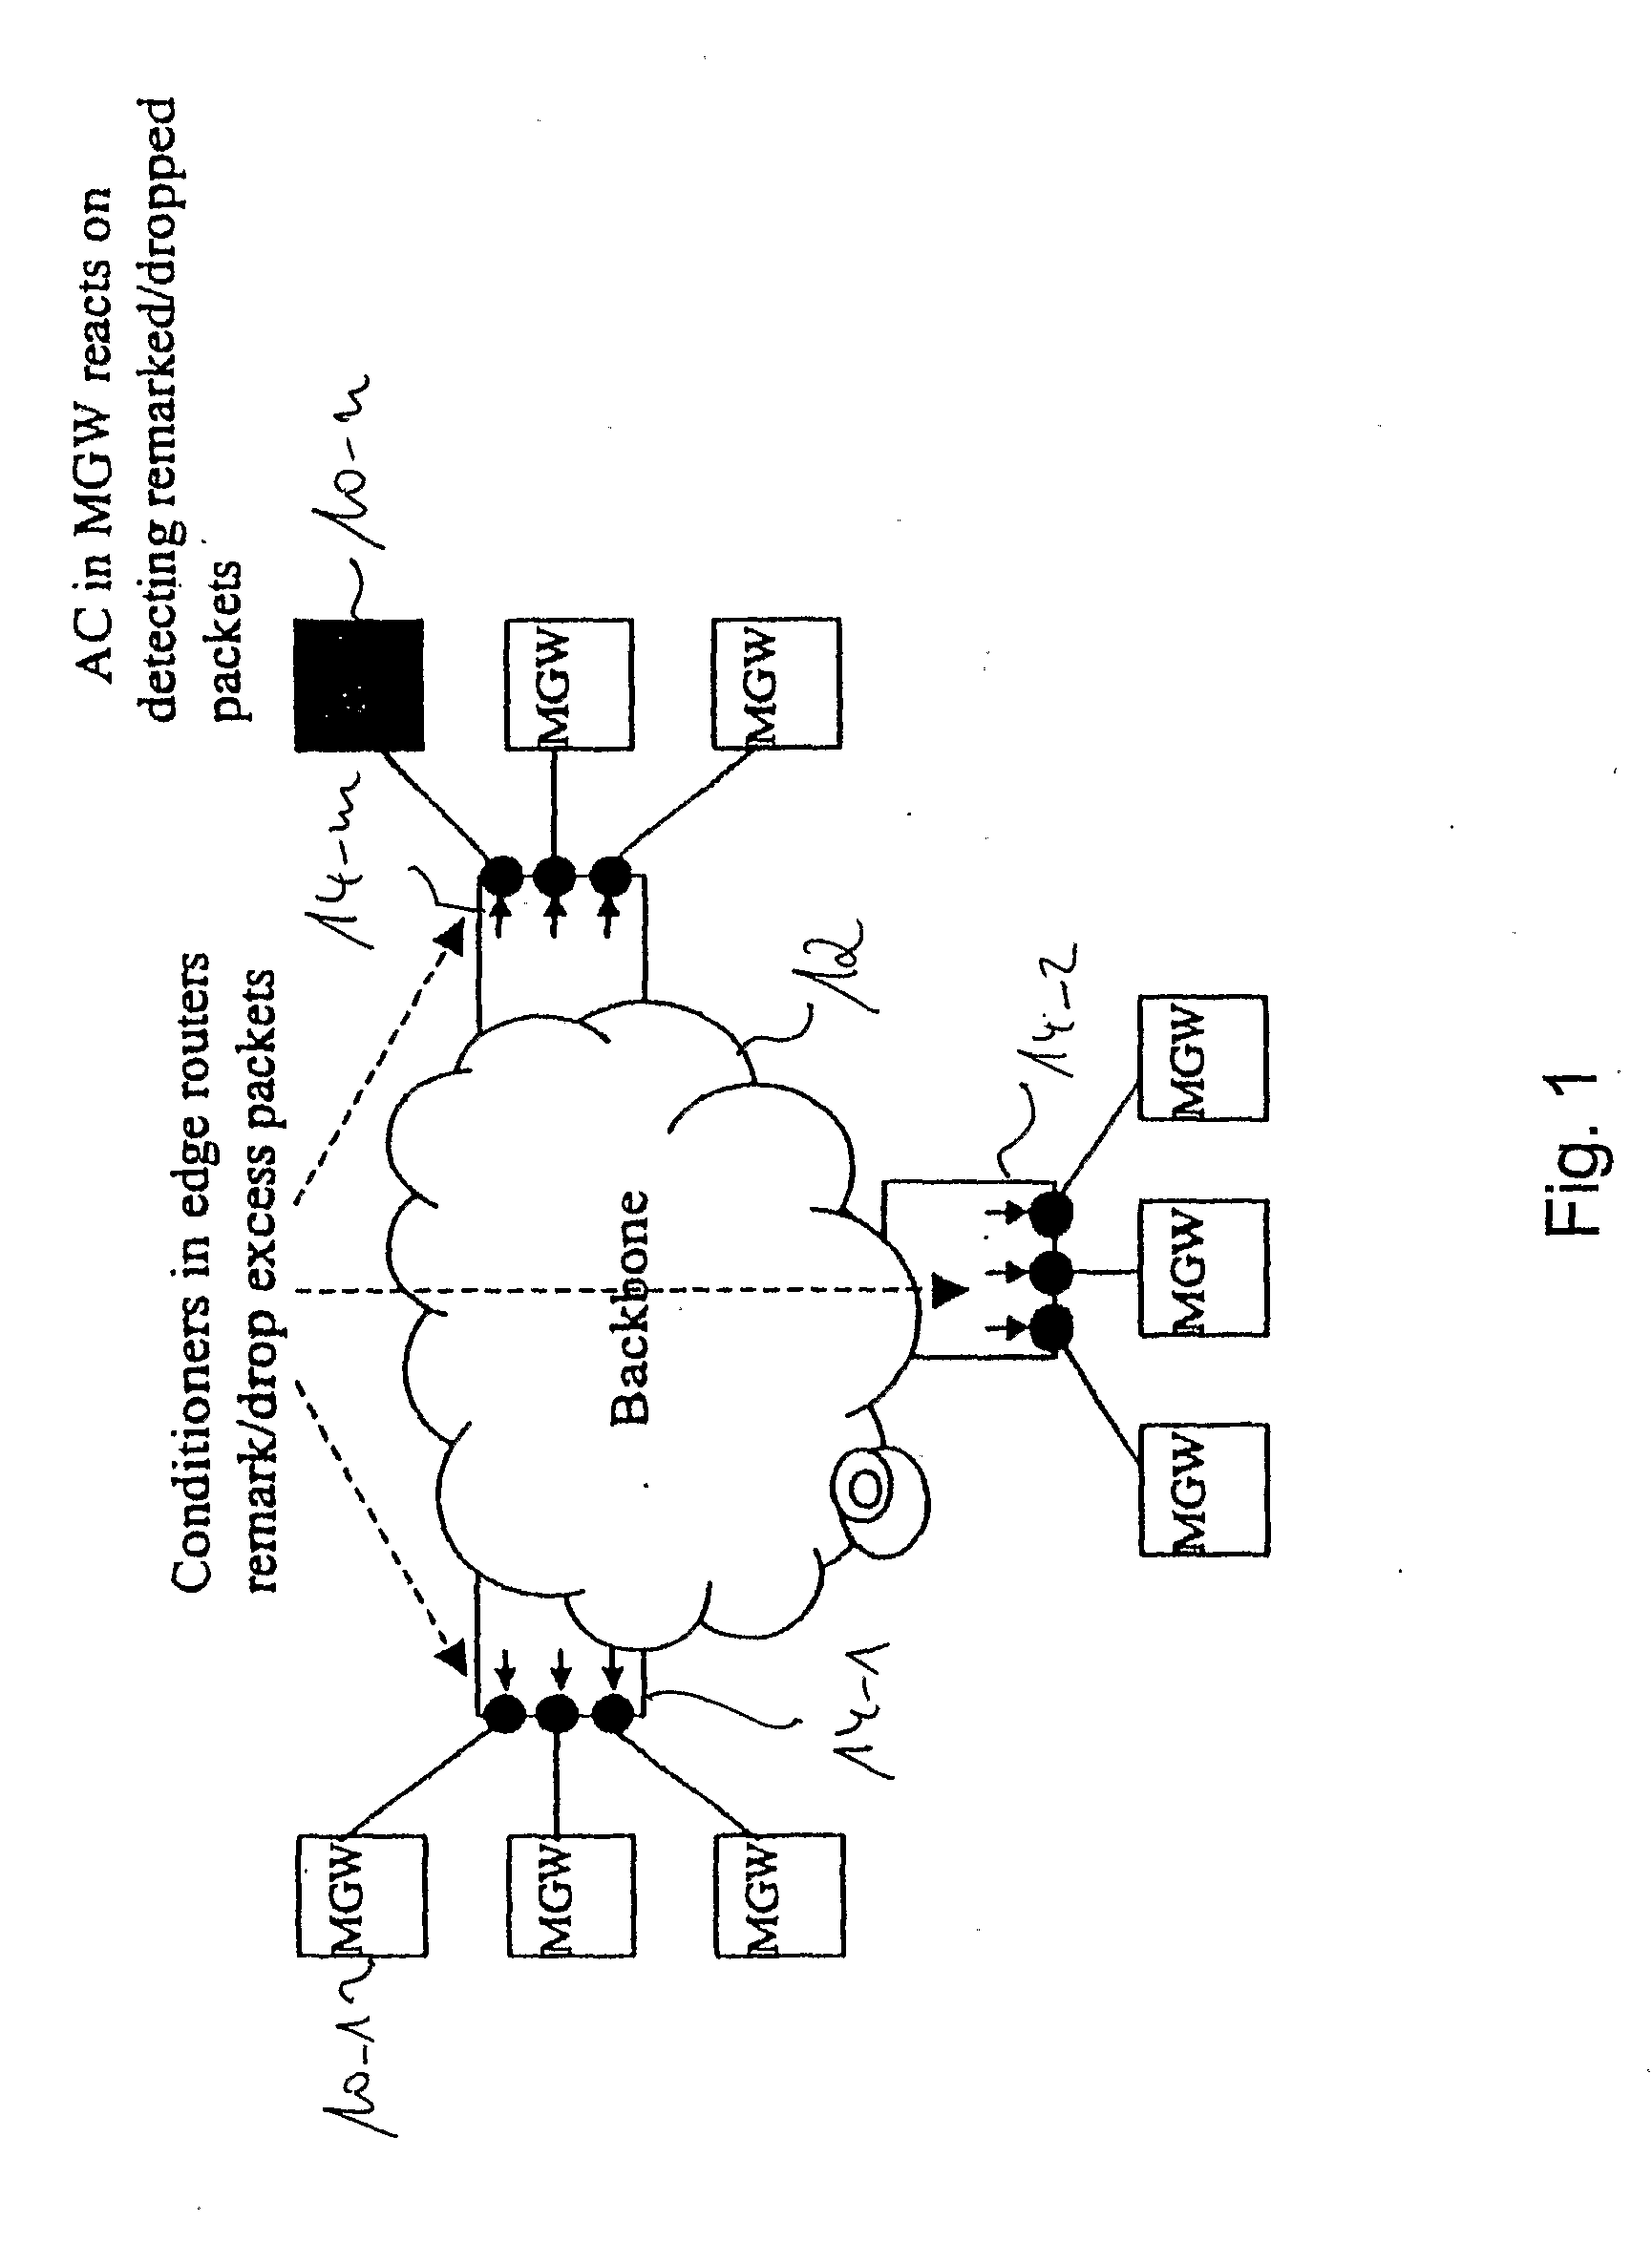 Session Admission Control Method and Apparatus